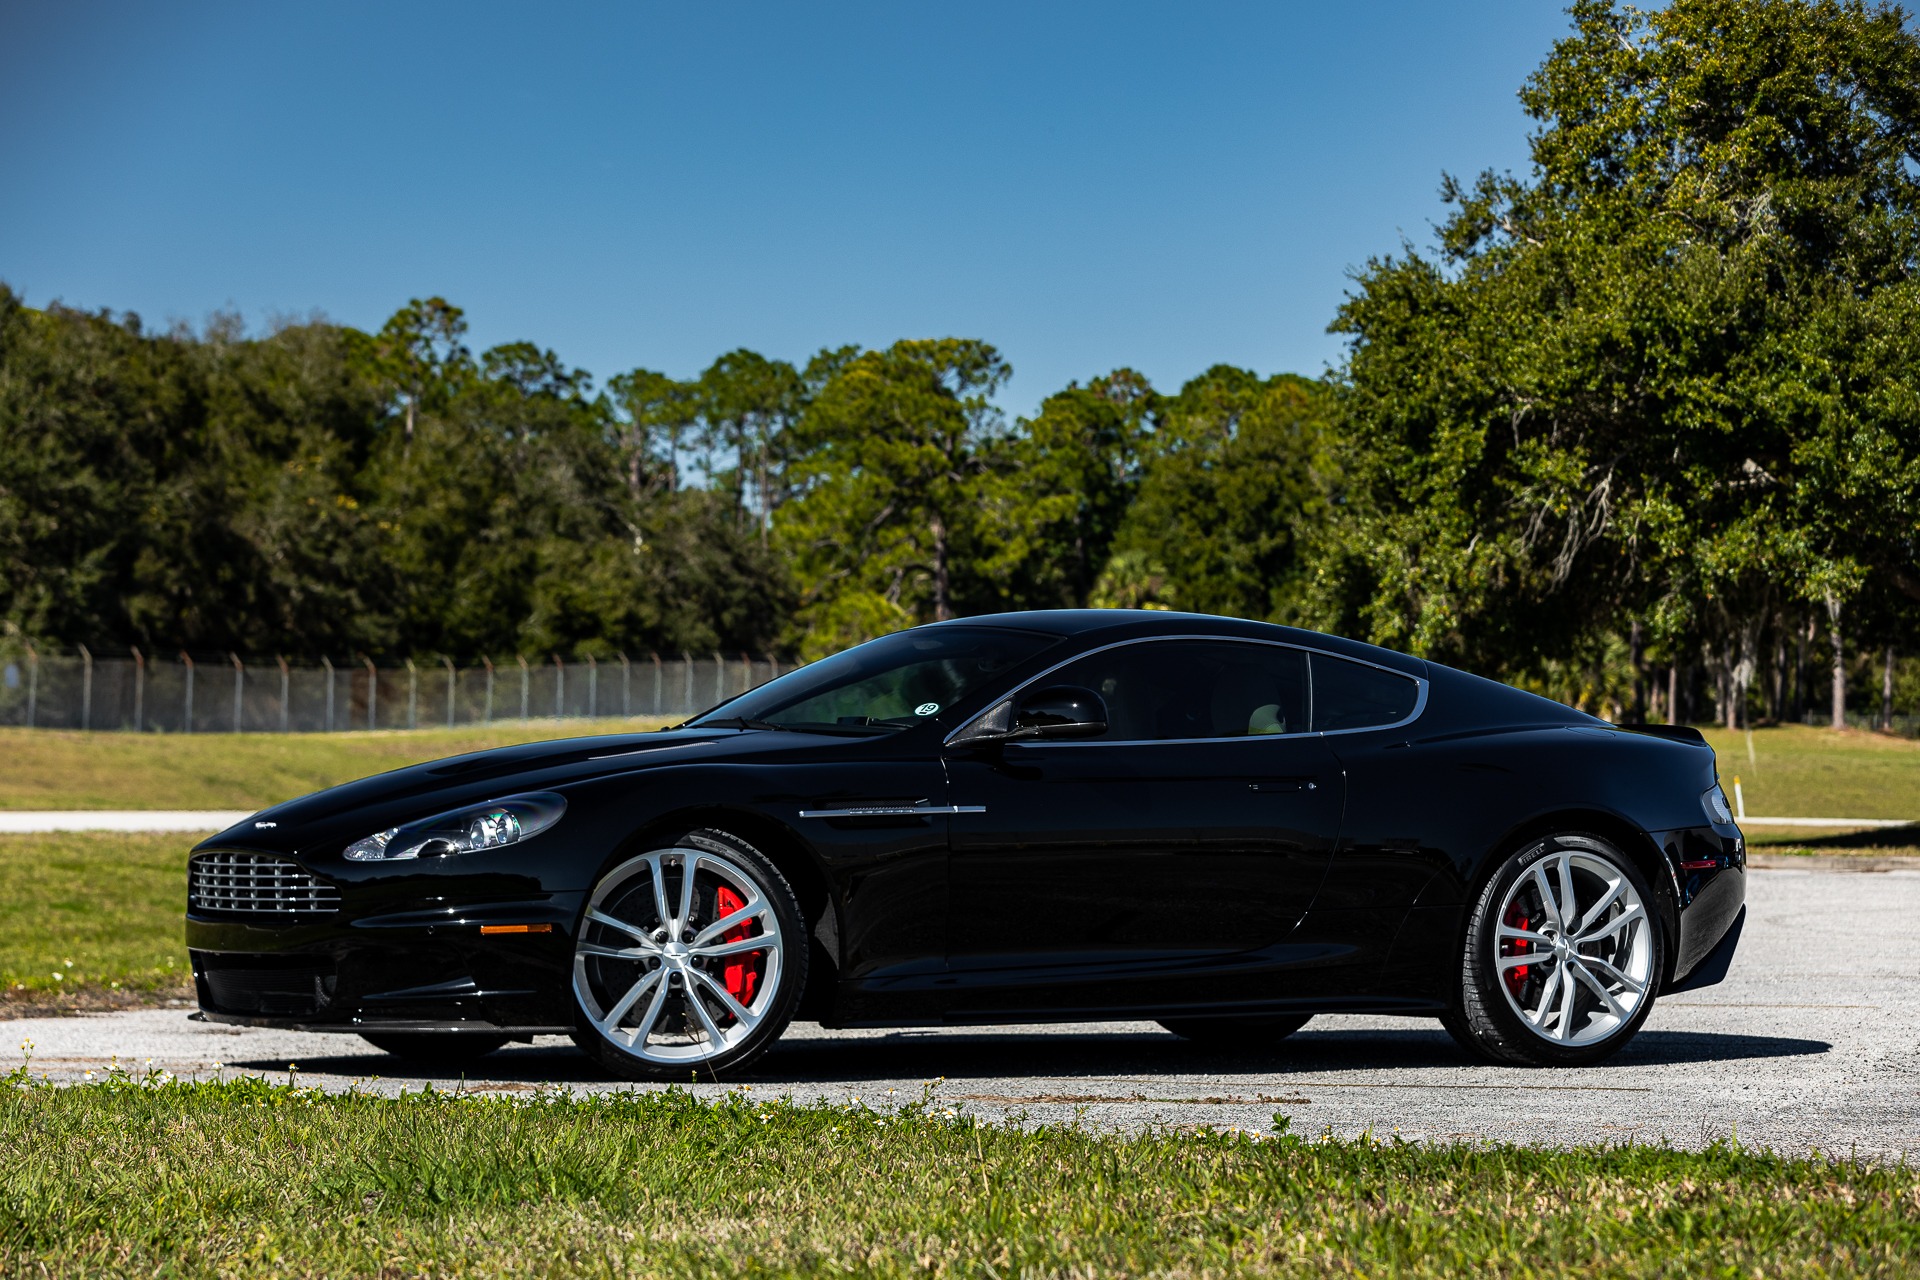 Used 2010 Aston Martin DBS for sale Call for price at McLaren Orlando LLC in Titusville FL 32780 1